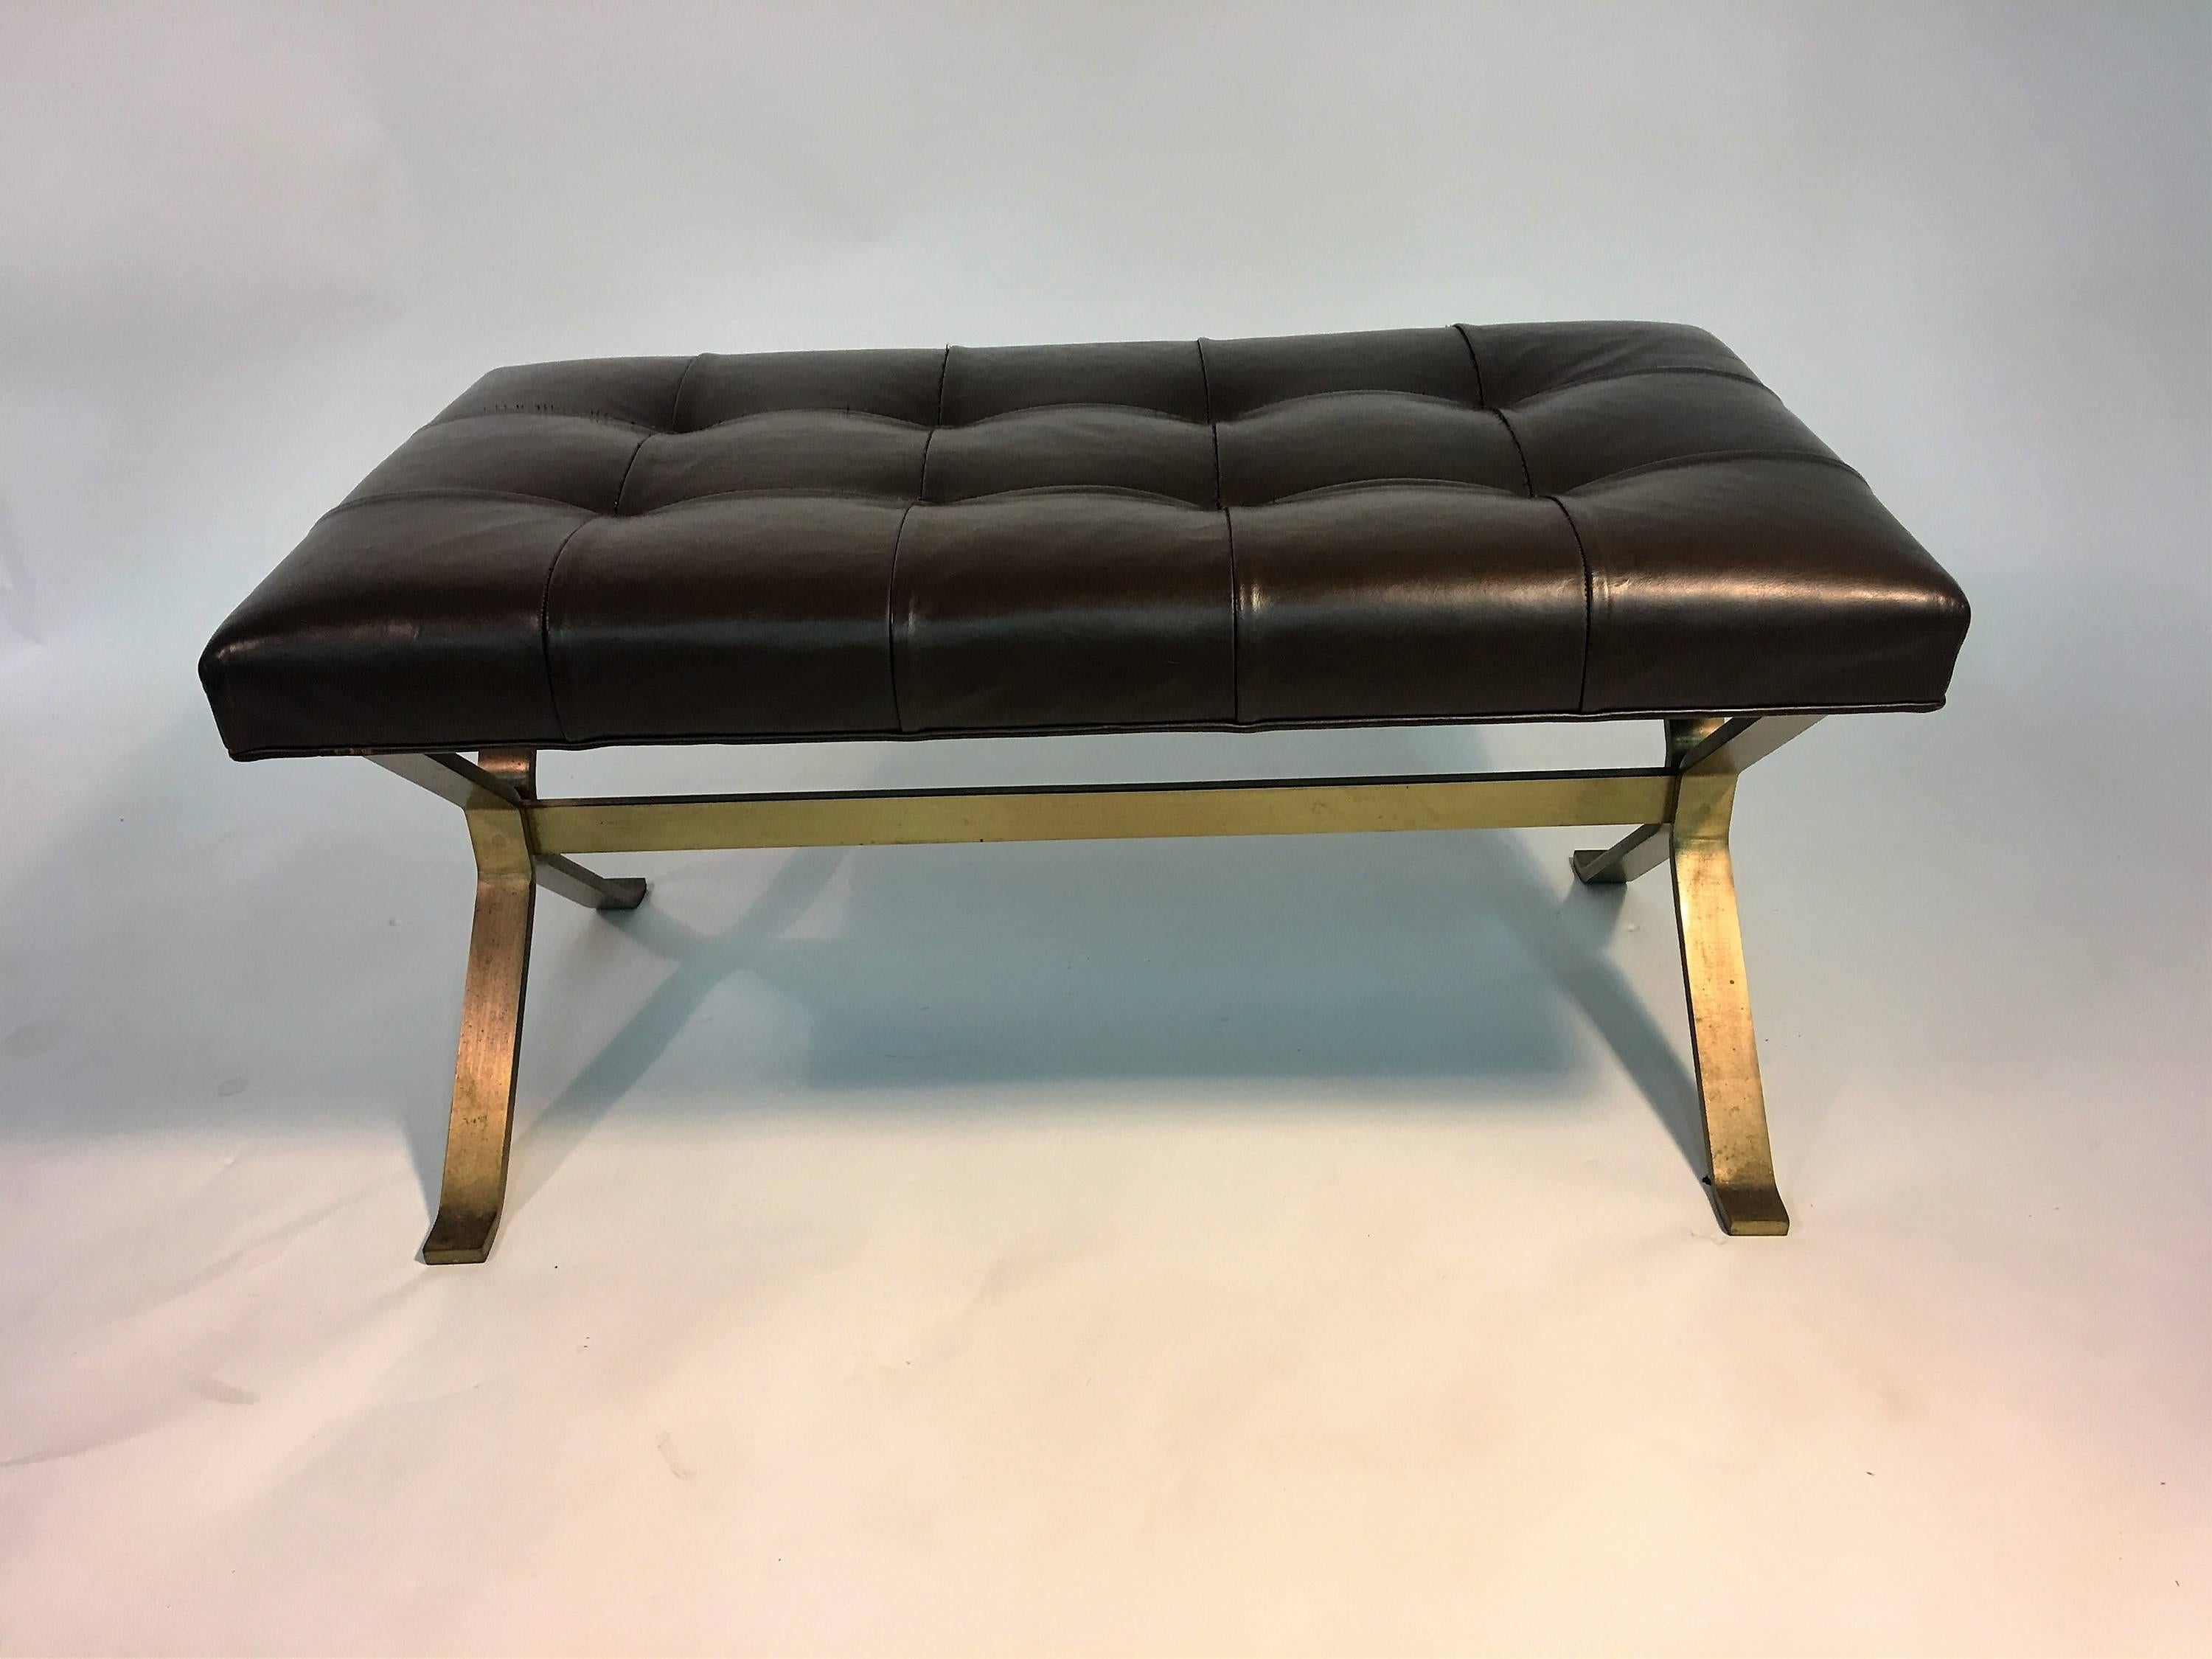 Great solid bronze X-base and stretcher leather bench. The bench top is in original deep chocolate waffle design leather seat.